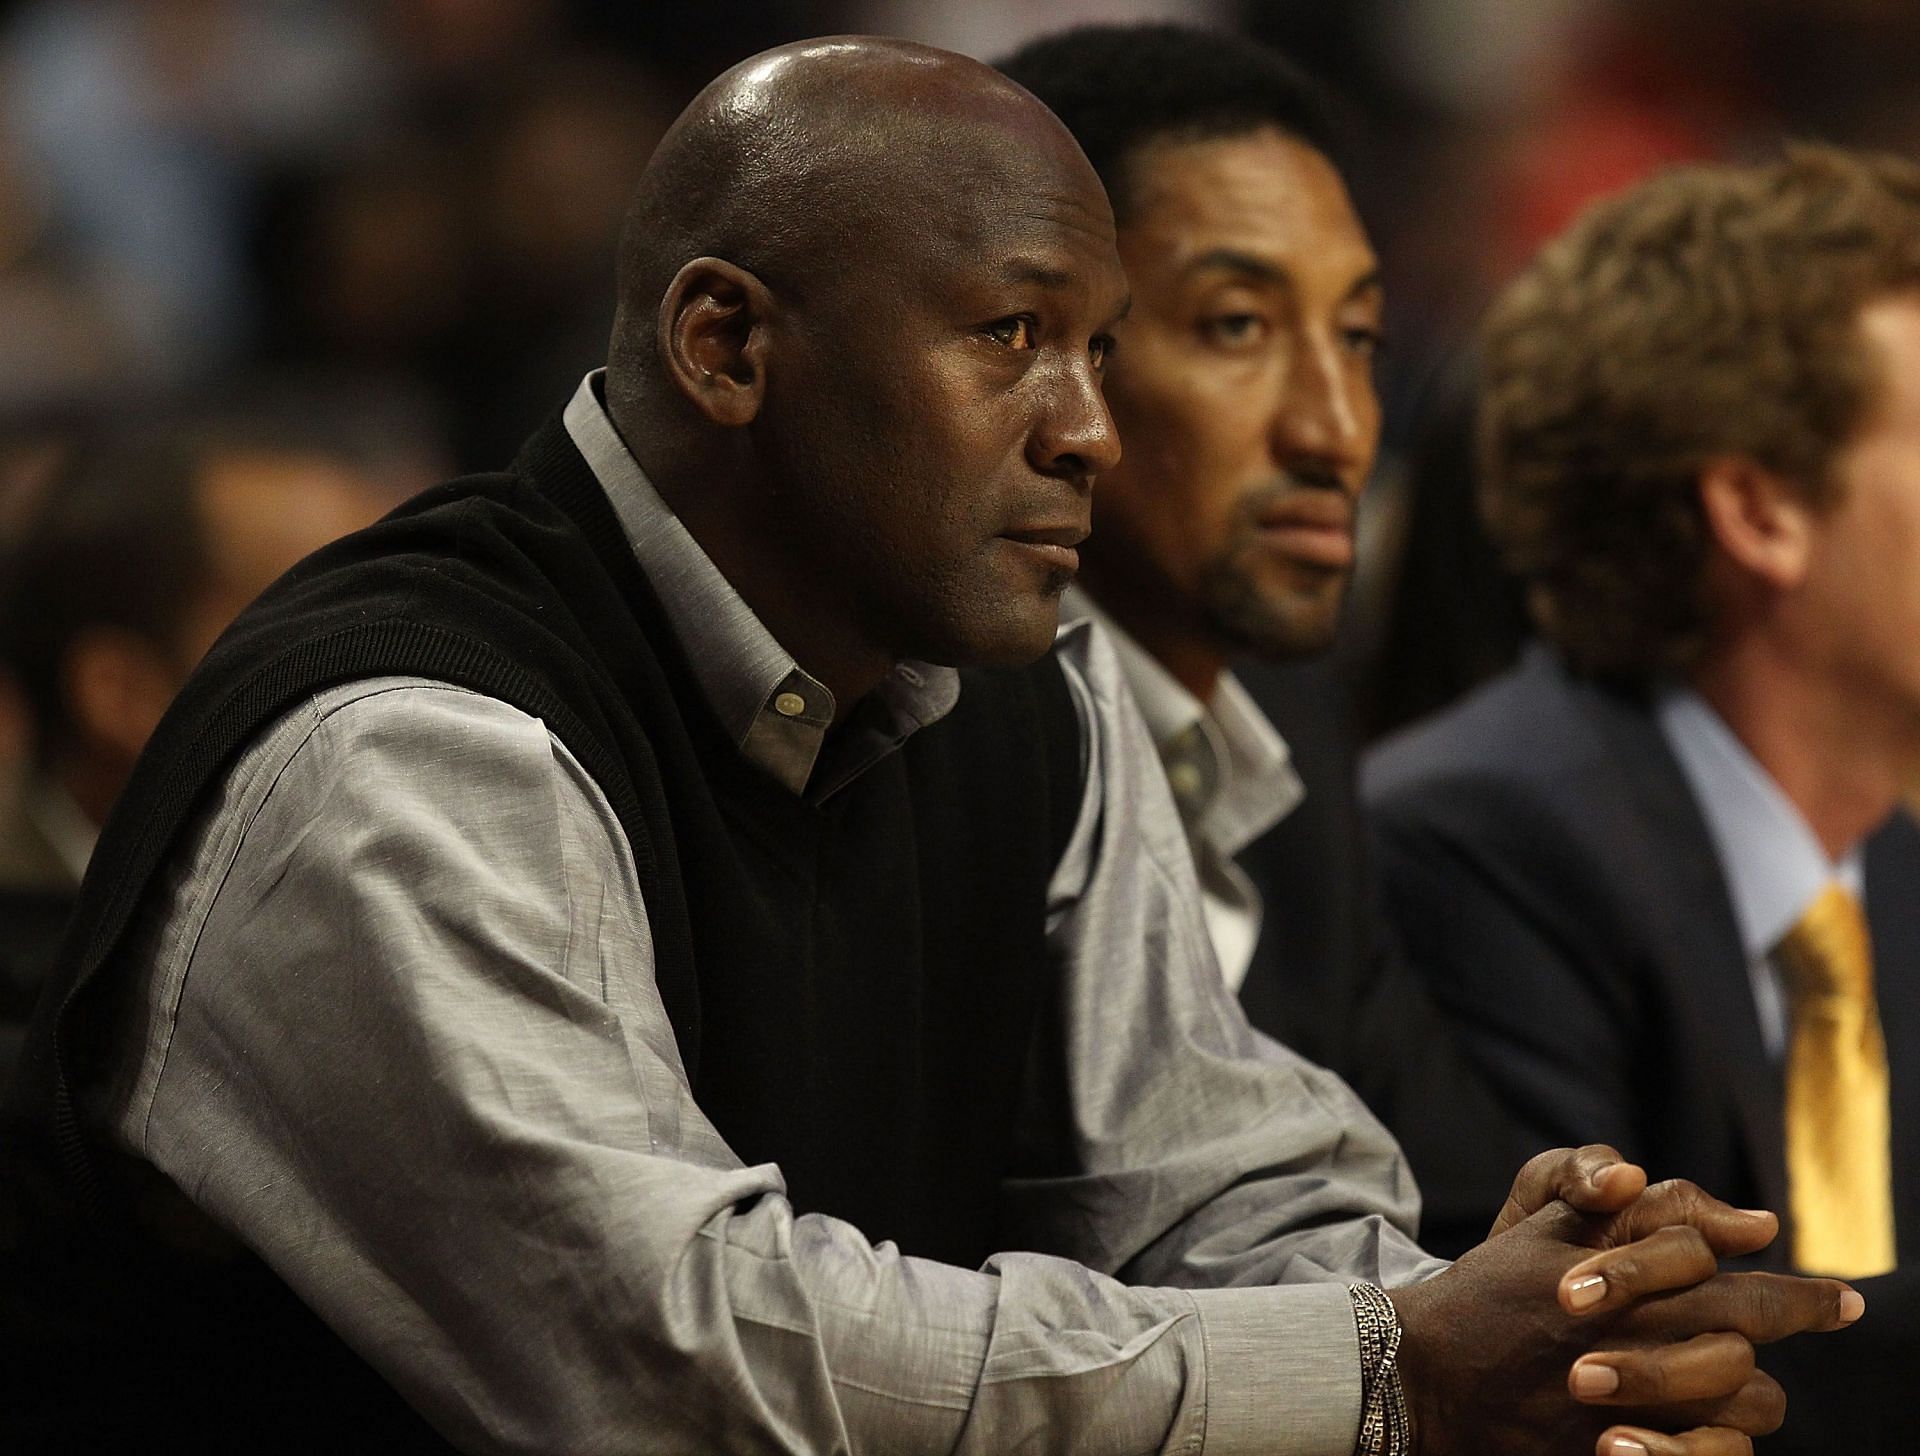 Michael Jordan and Scottie Pippen watching a game in 2011.